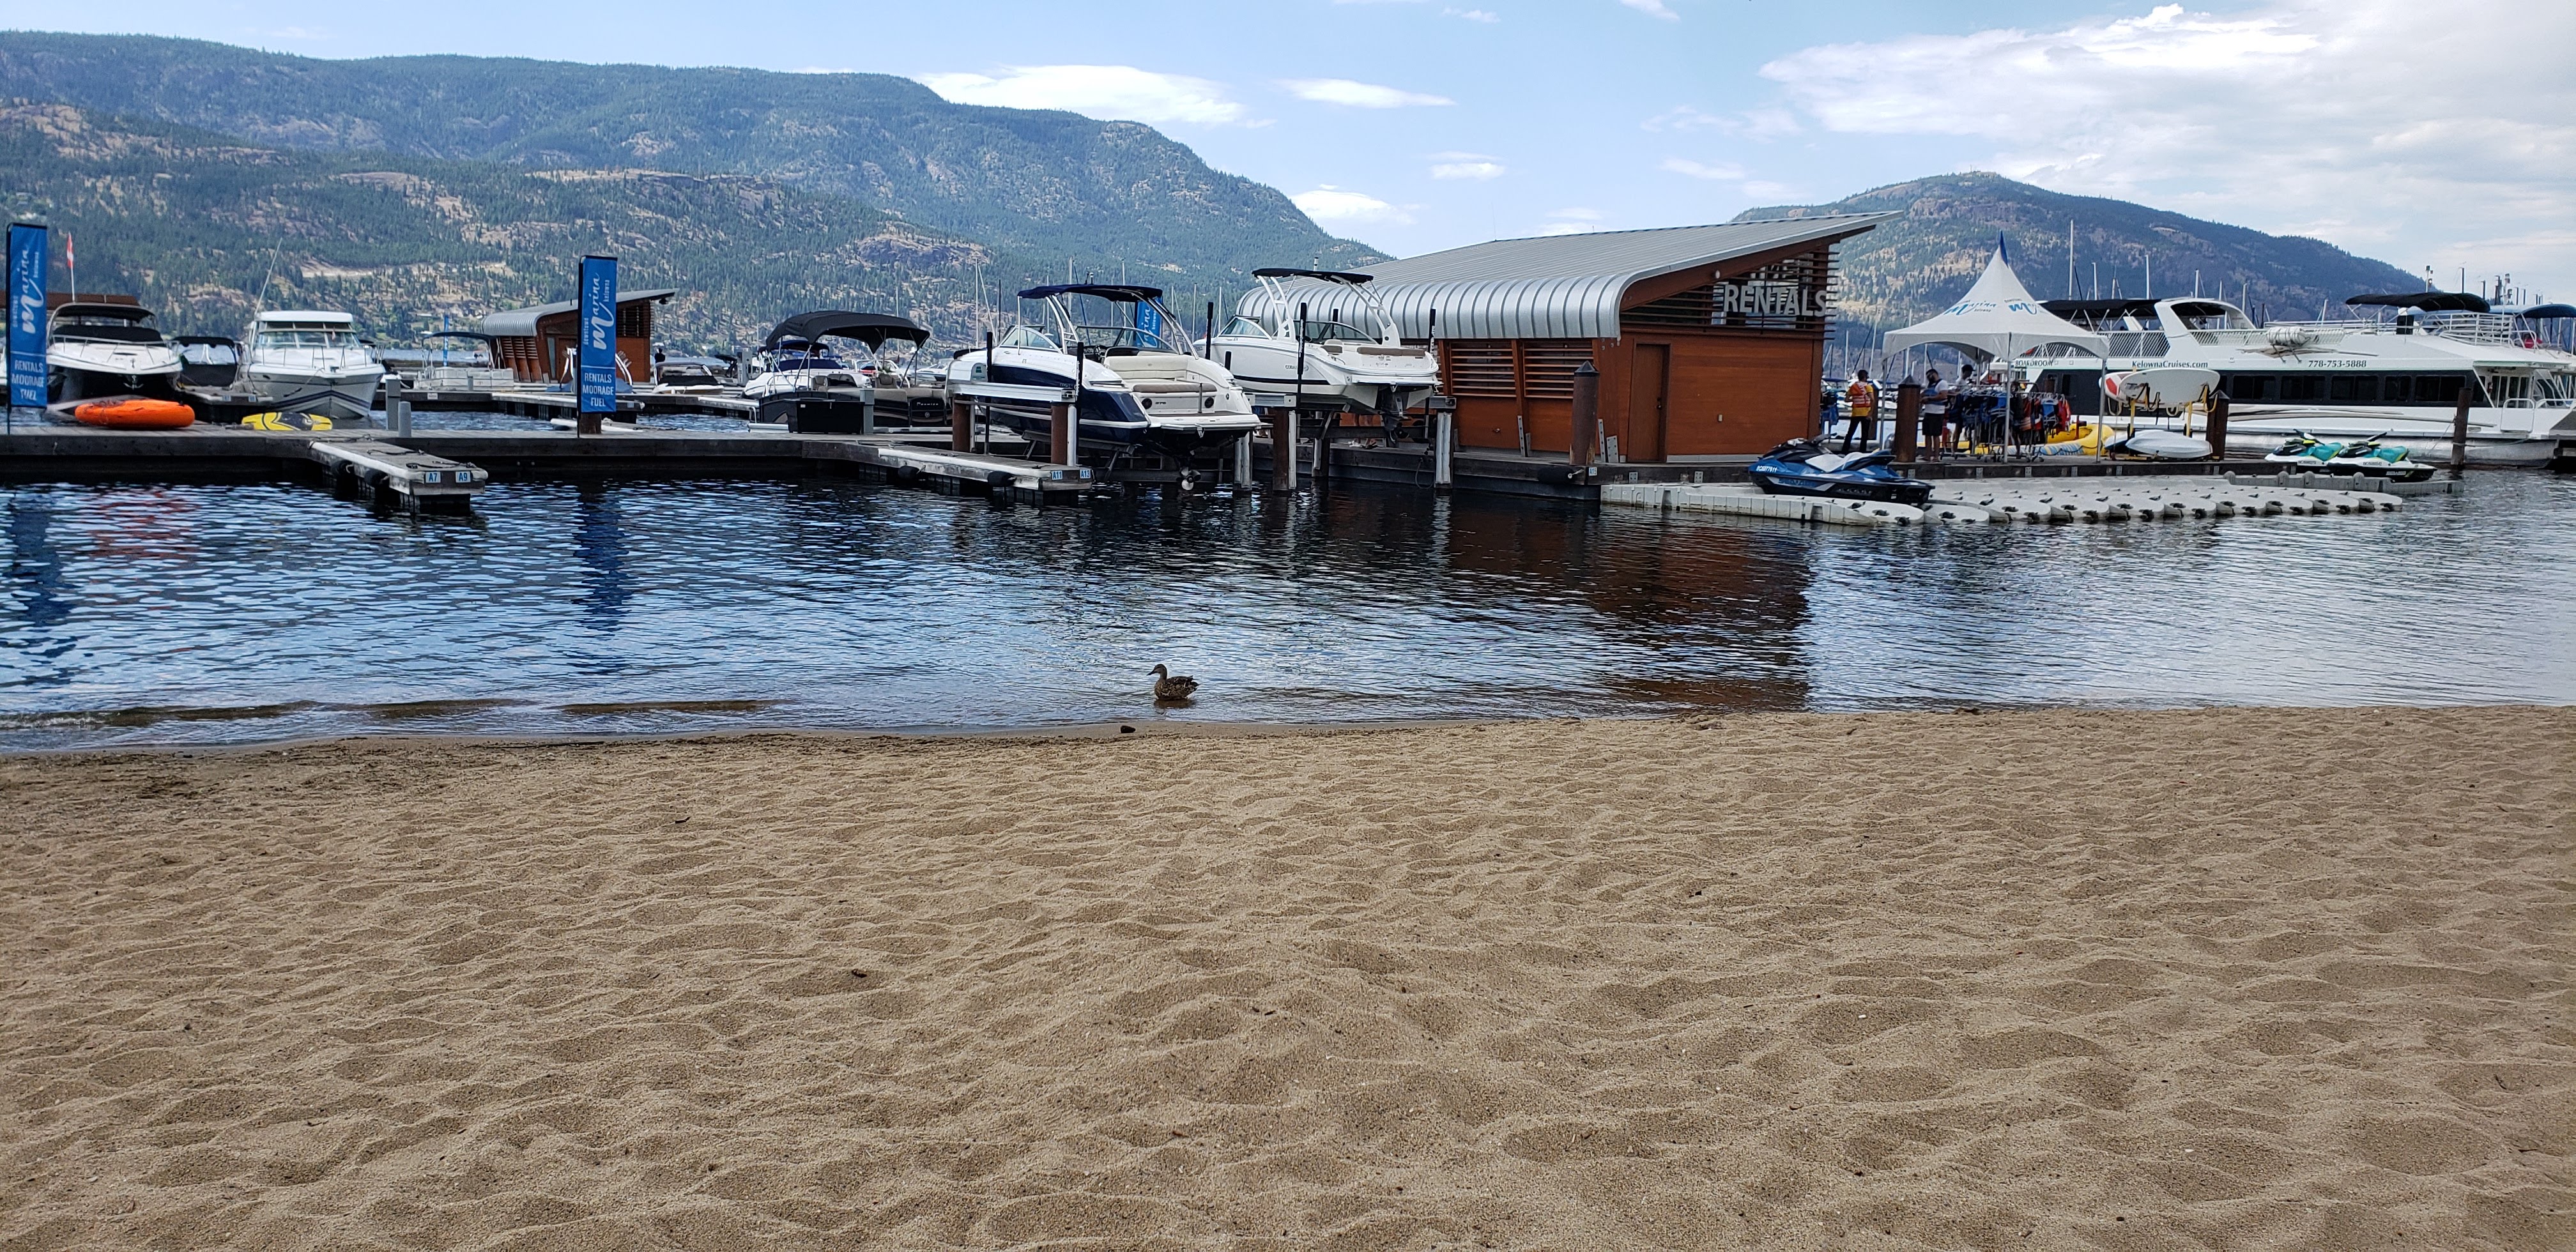 In the foreground a sandy beach. In the middle of the shot boats and docks. In the background a mountain.